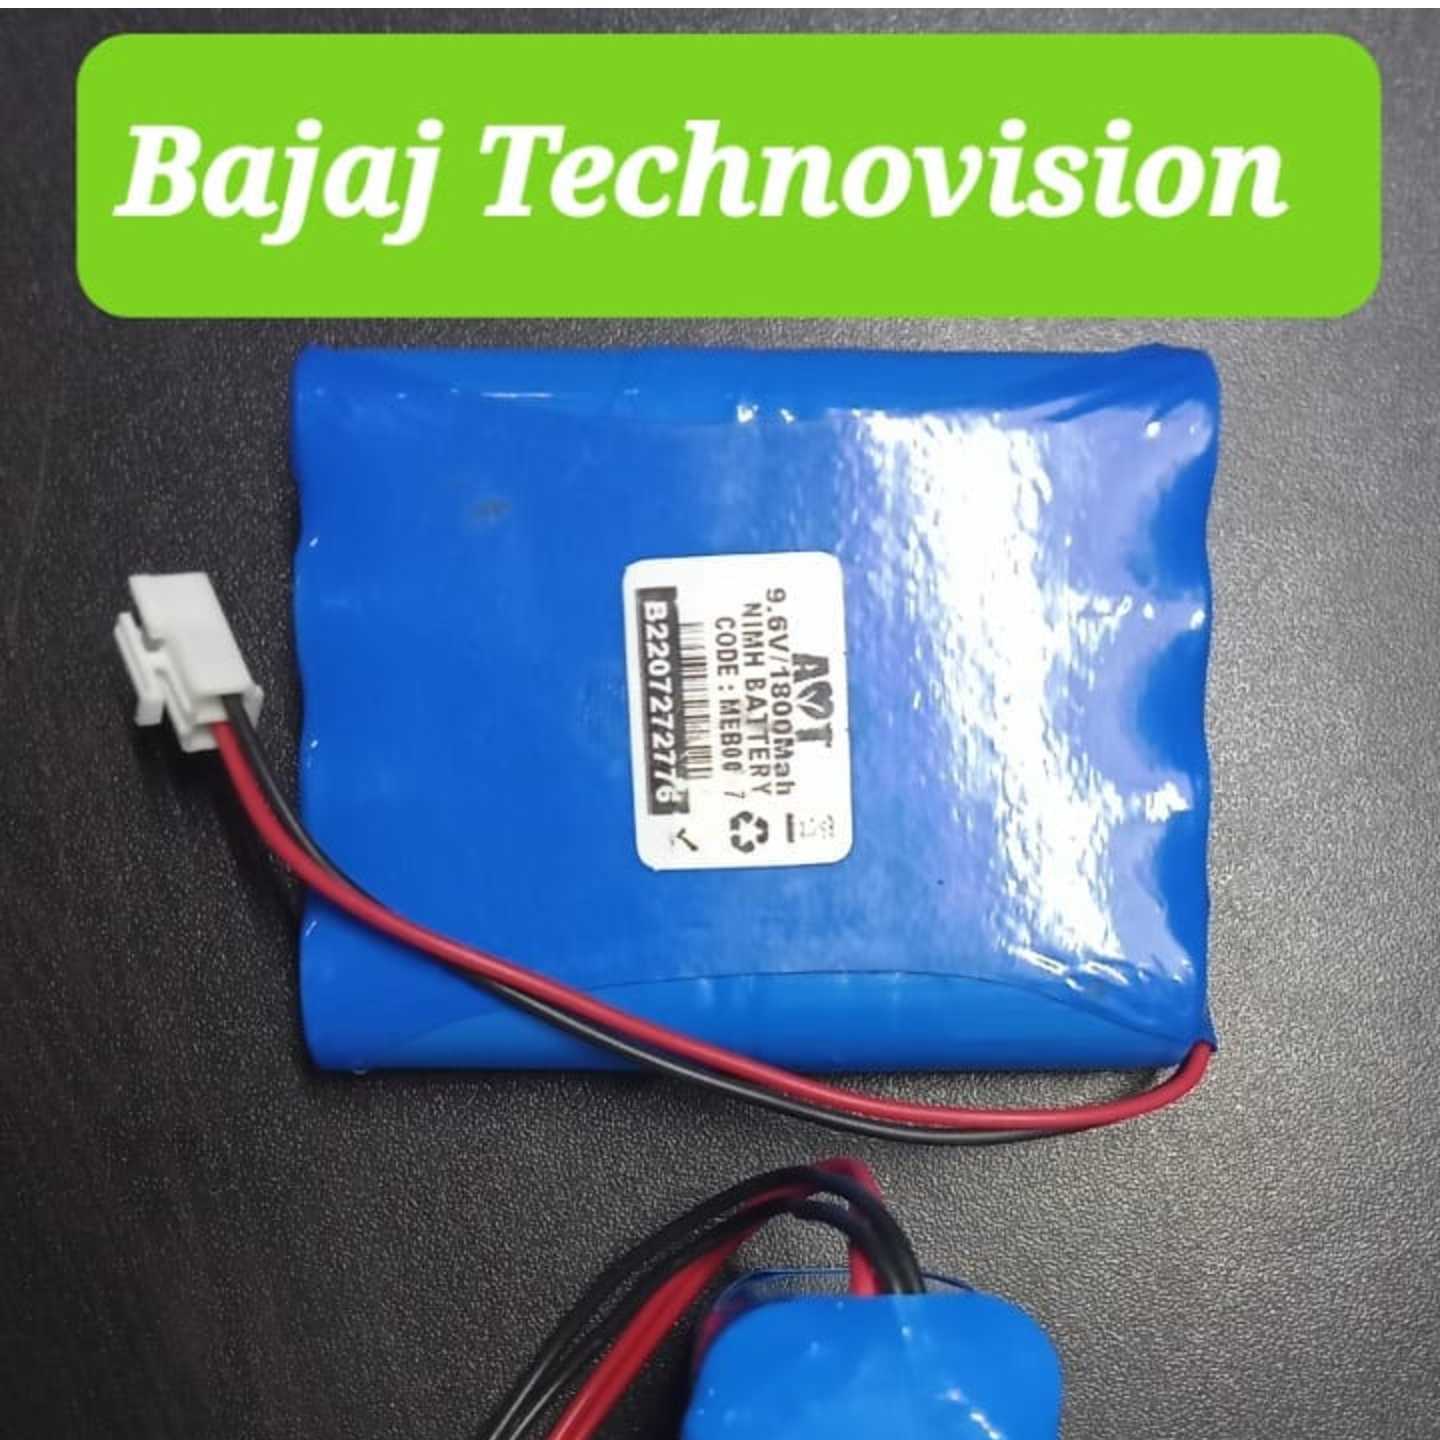 Battery for CMS 5100 Lithium ion